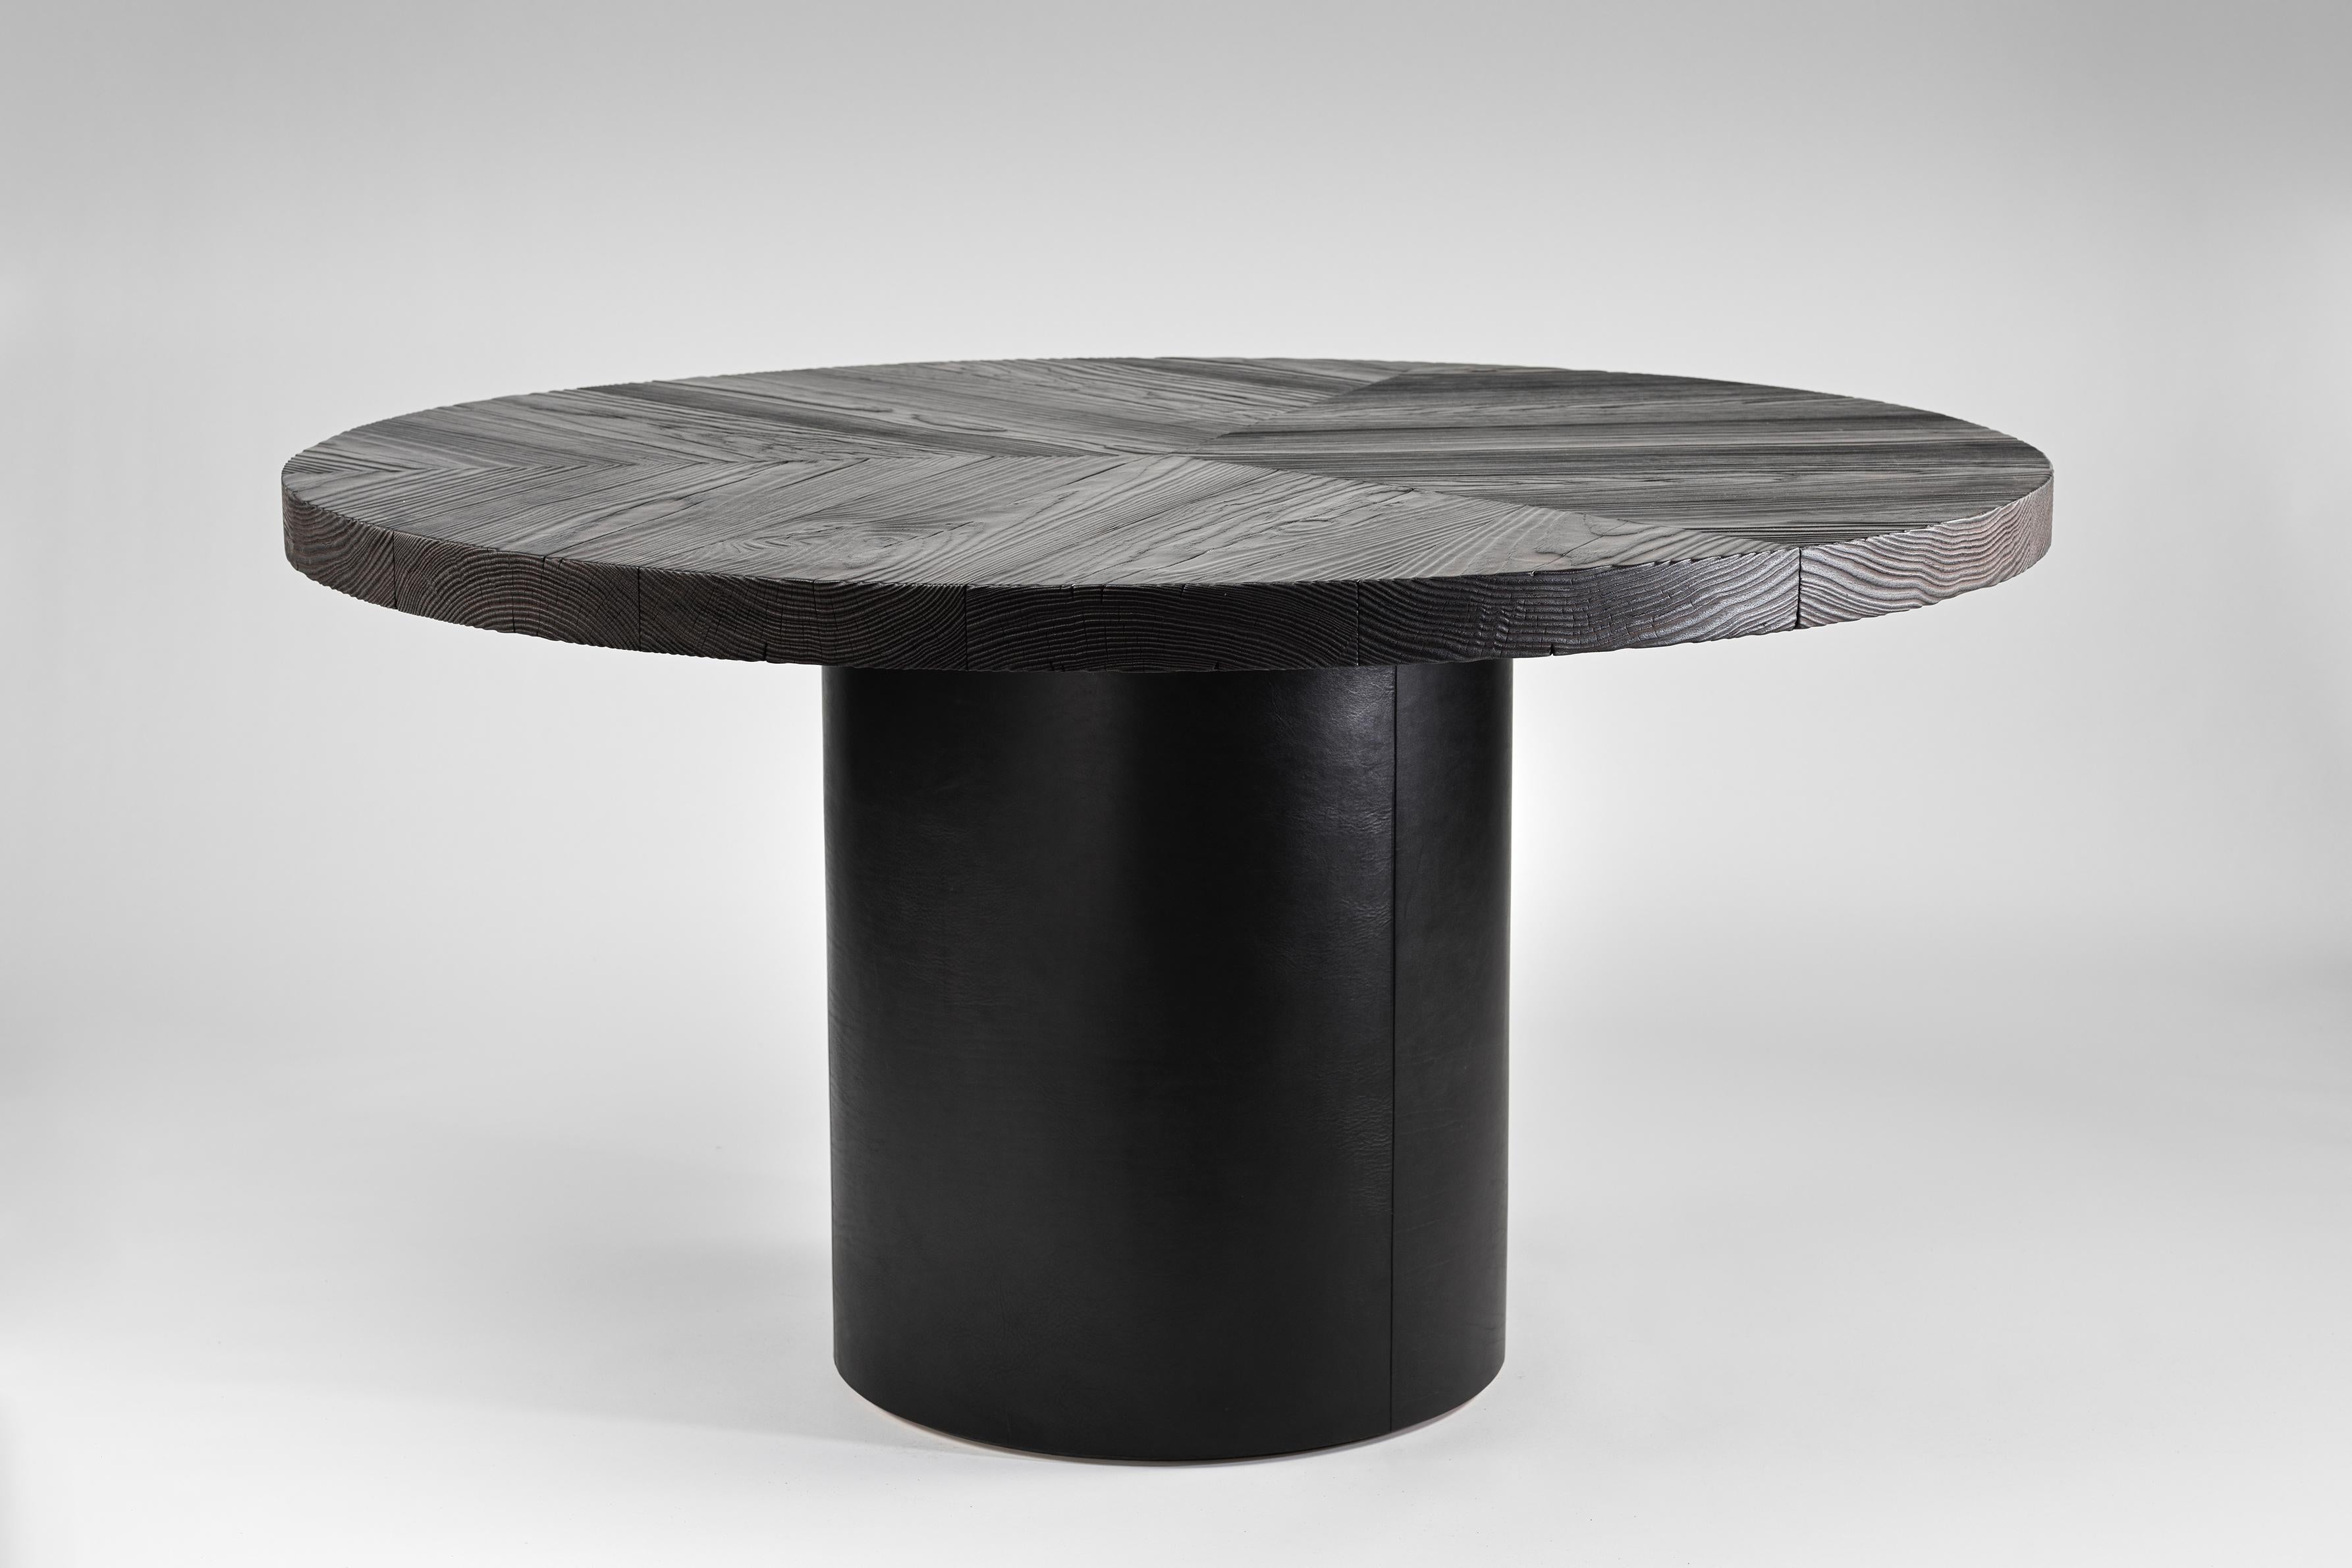 The Norma Table is obtained through extensive research into the properties of Yellow Pine. The table top consists of three pieces. The wood grain of every piece is directed towards the centre of the table. This ensures that the side of the table top